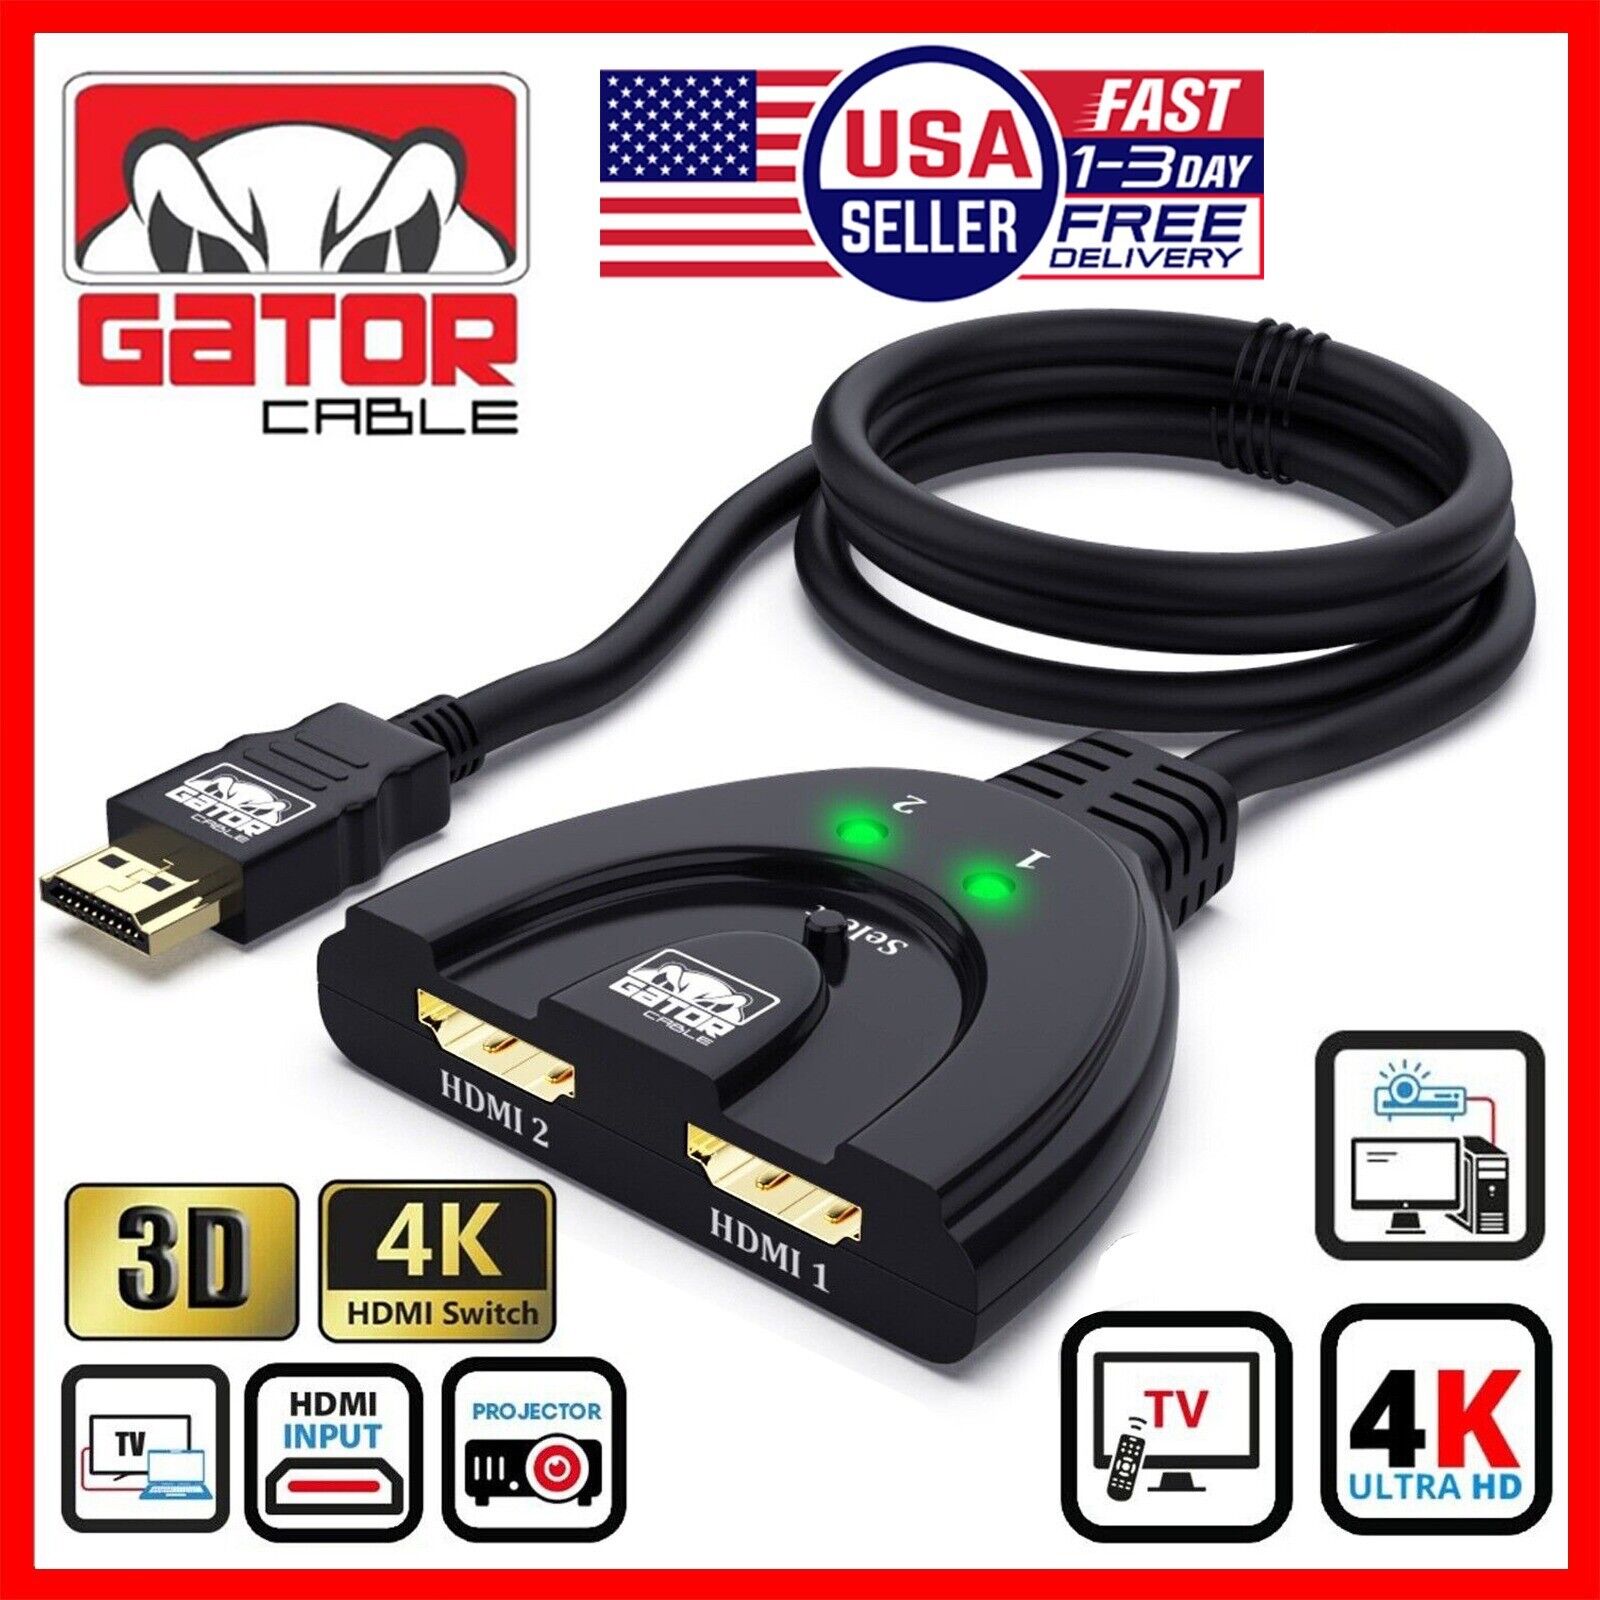 4K HDMI 2.0 Cable Auto Switch Switcher Splitter Adapter 2 In to 1 Out Devices